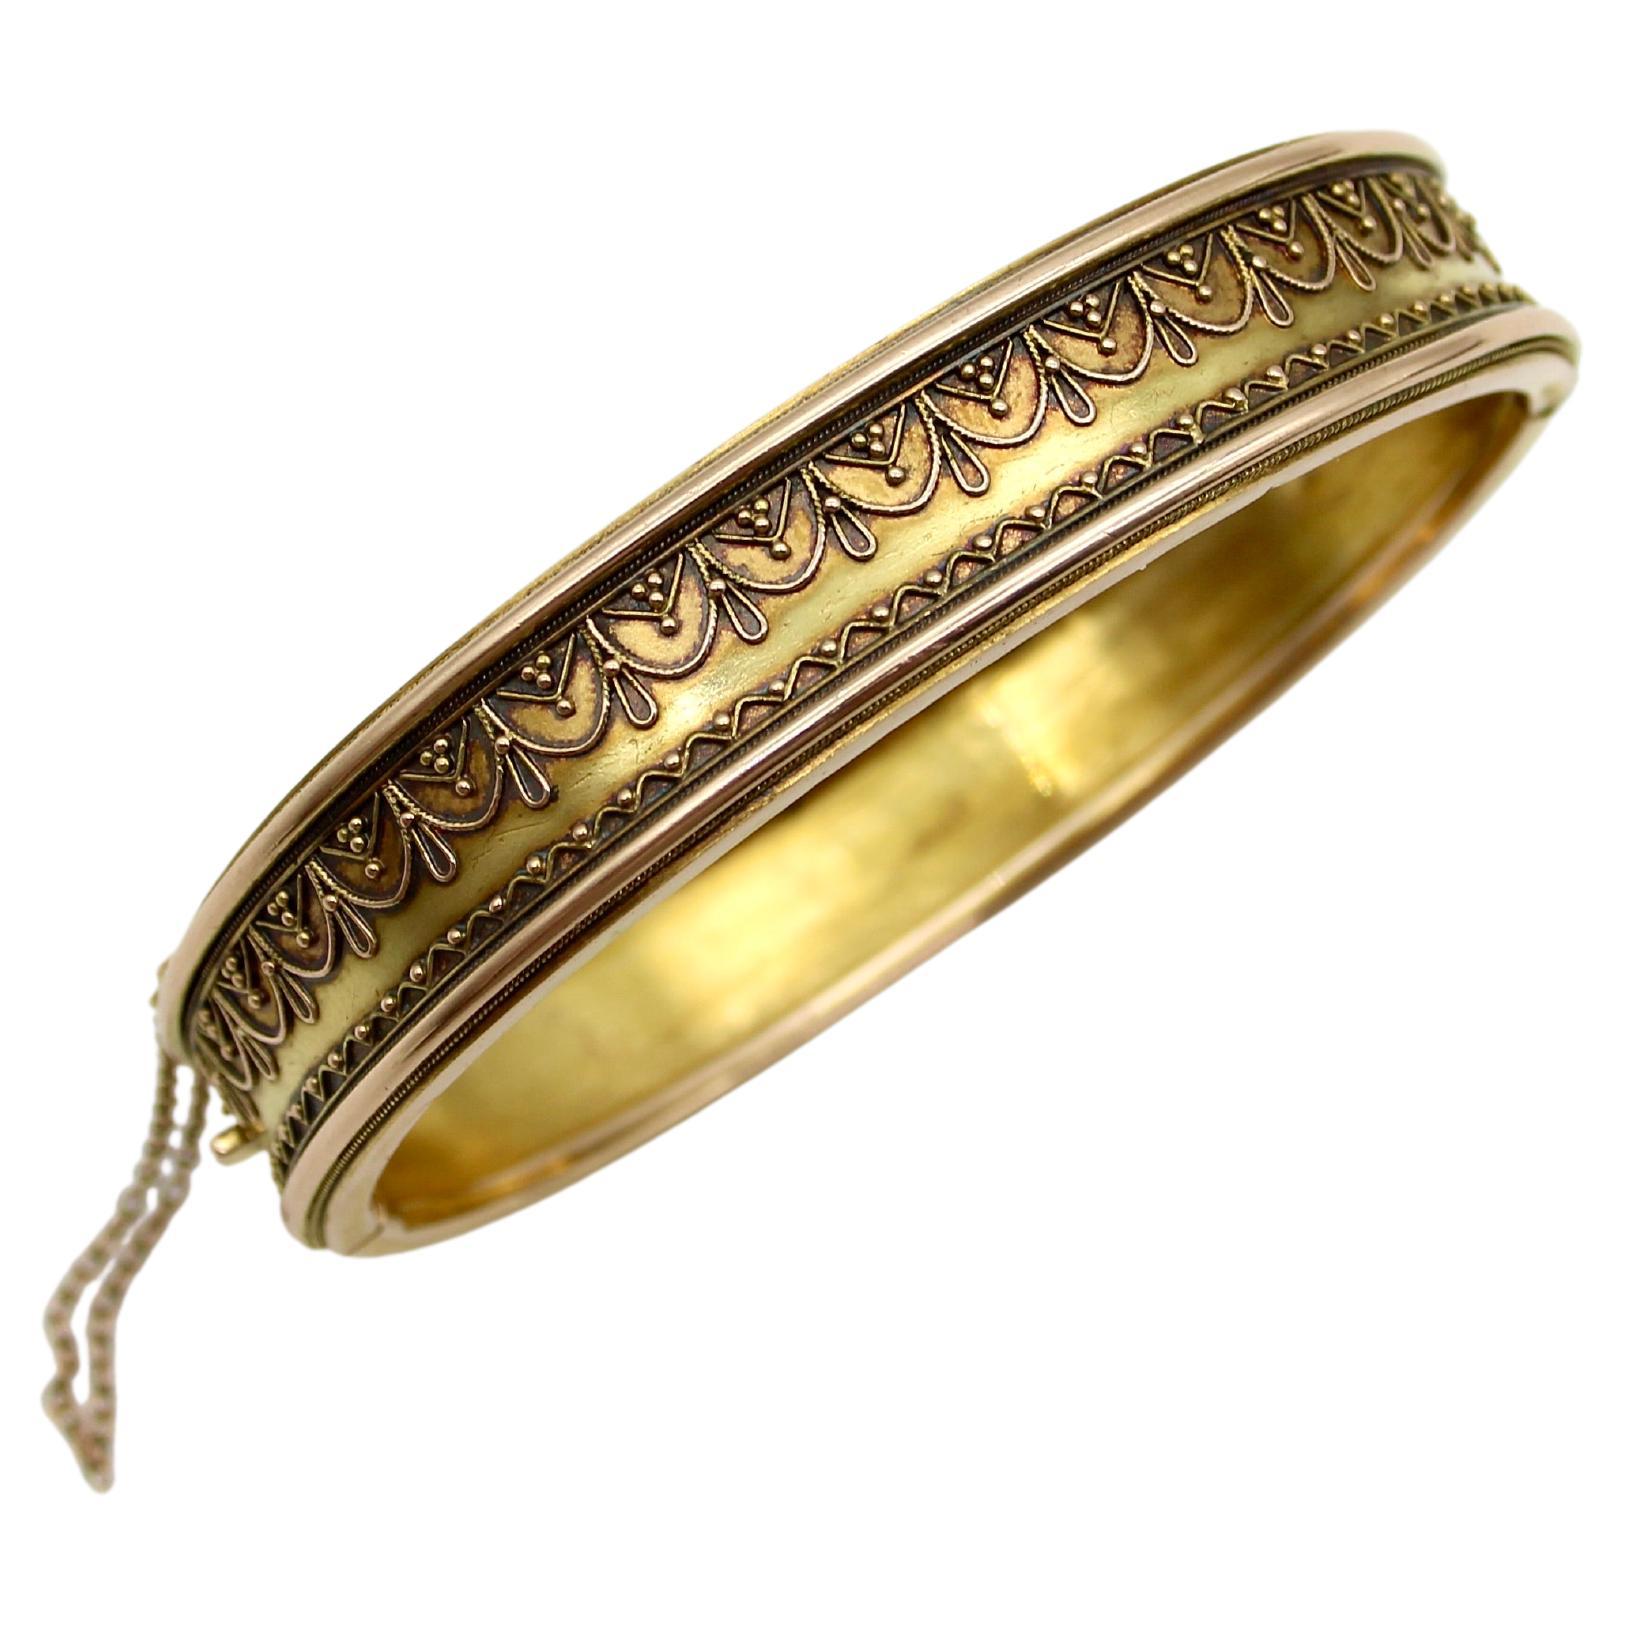 15k Gold Cannetille Etruskisches Revival-Armband